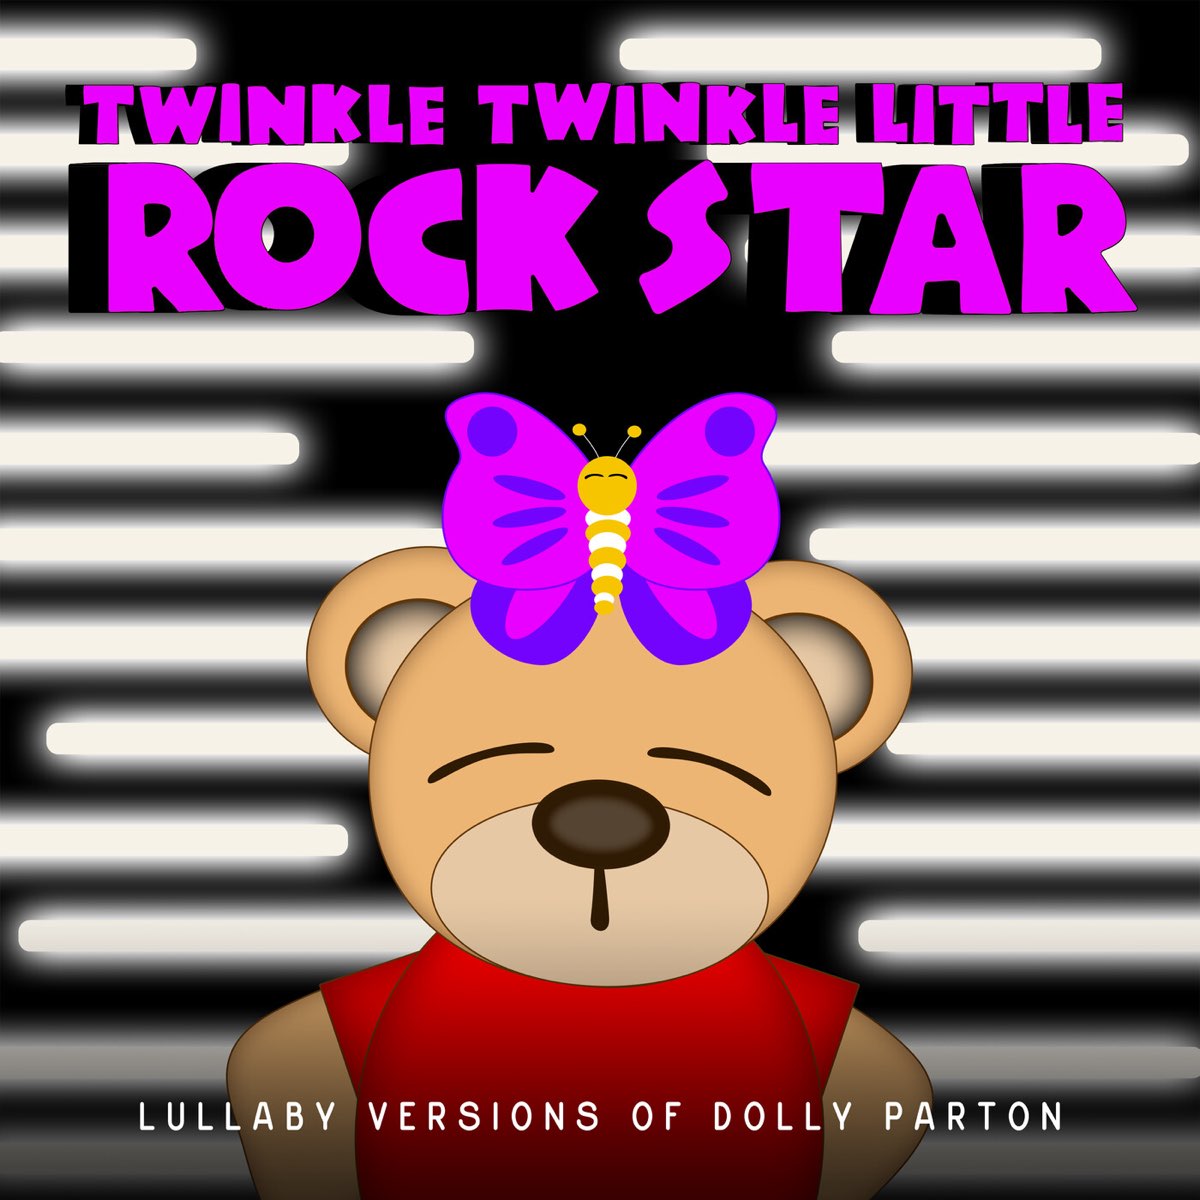 ‎Lullaby Versions of Dolly Parton by Twinkle Twinkle Little Rock Star ...